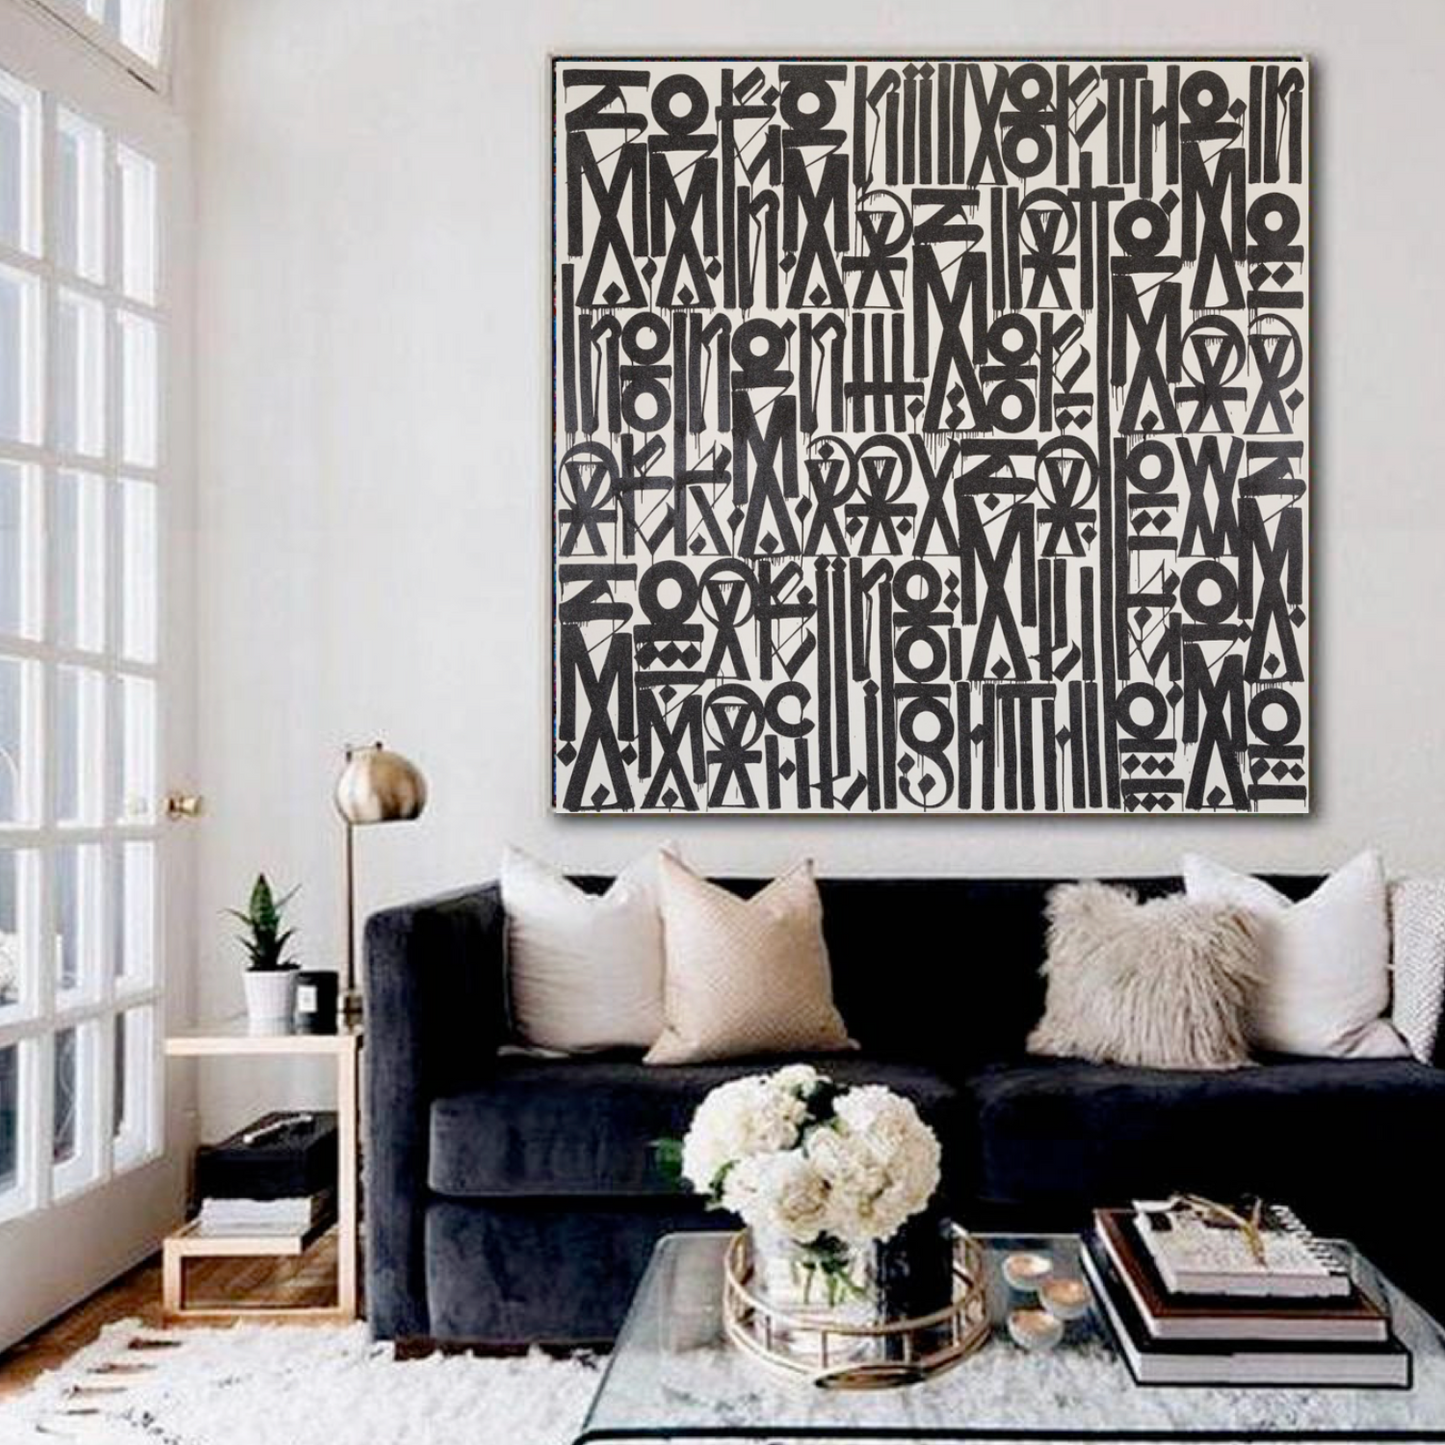 Retna Style Black White Calligraphy Font Painting